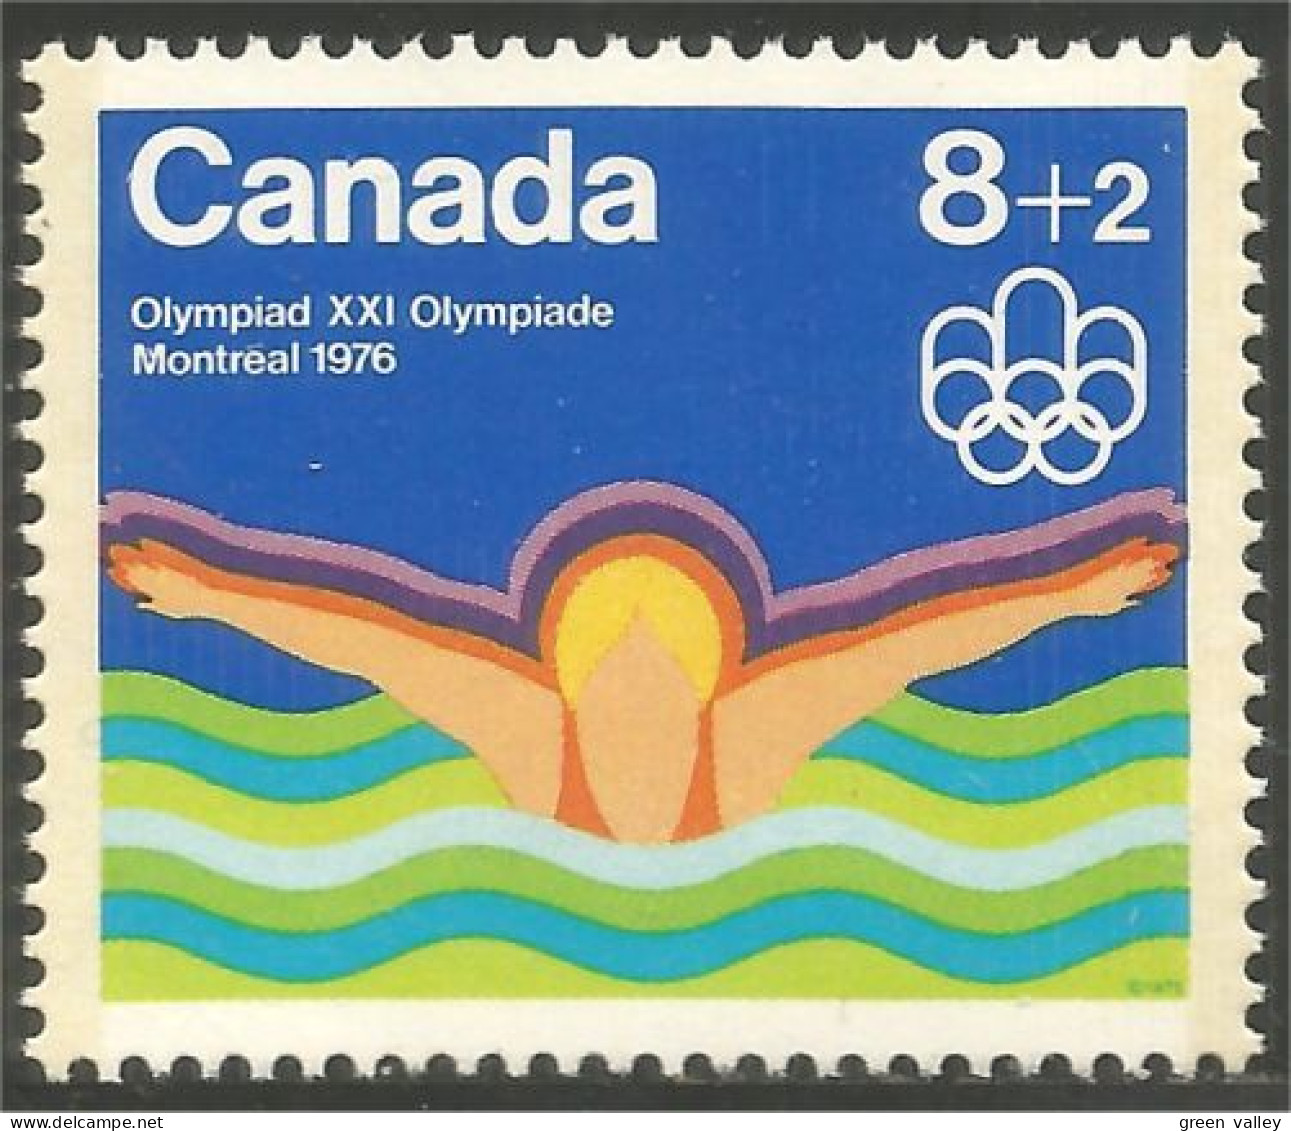 Canada 8c+2c Natation Swimming Jeux Olympiques Montreal 1976 Olympic Games MNH ** Neuf SC (CB-04e) - Natación